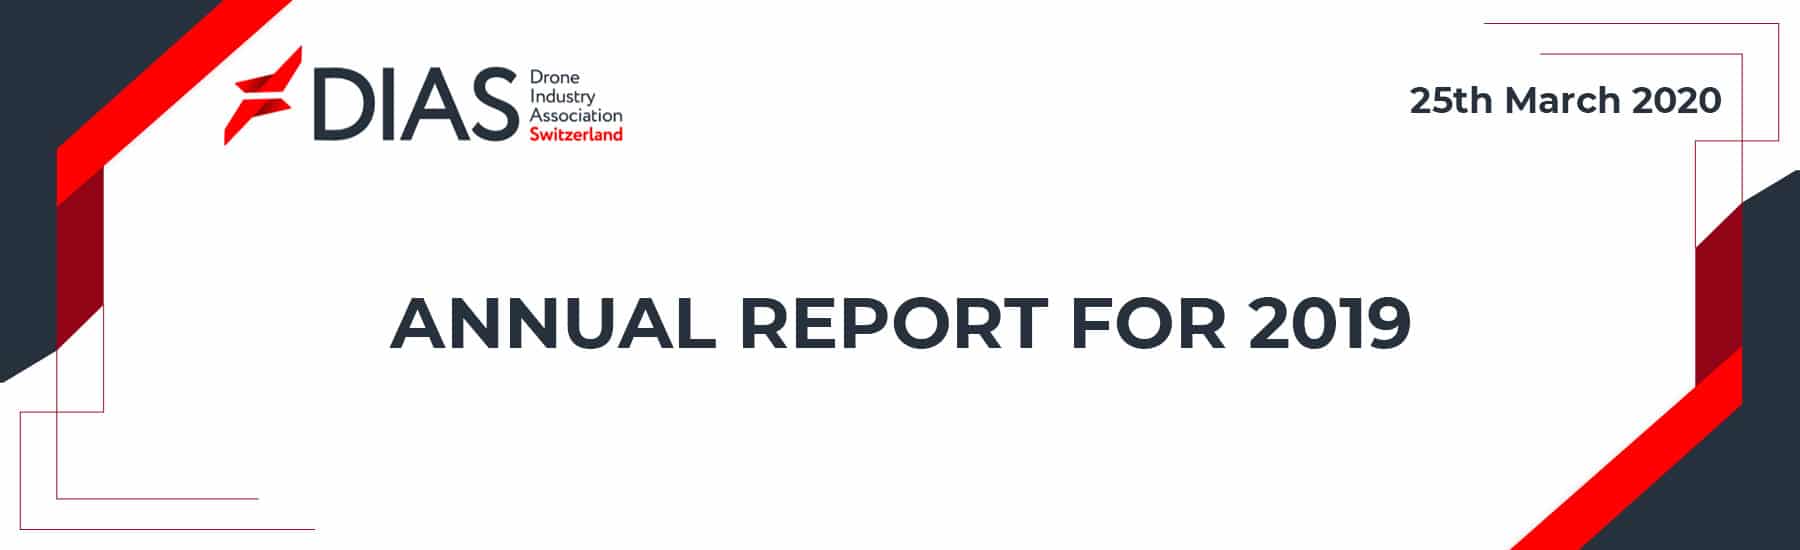 Annual Report for 2019